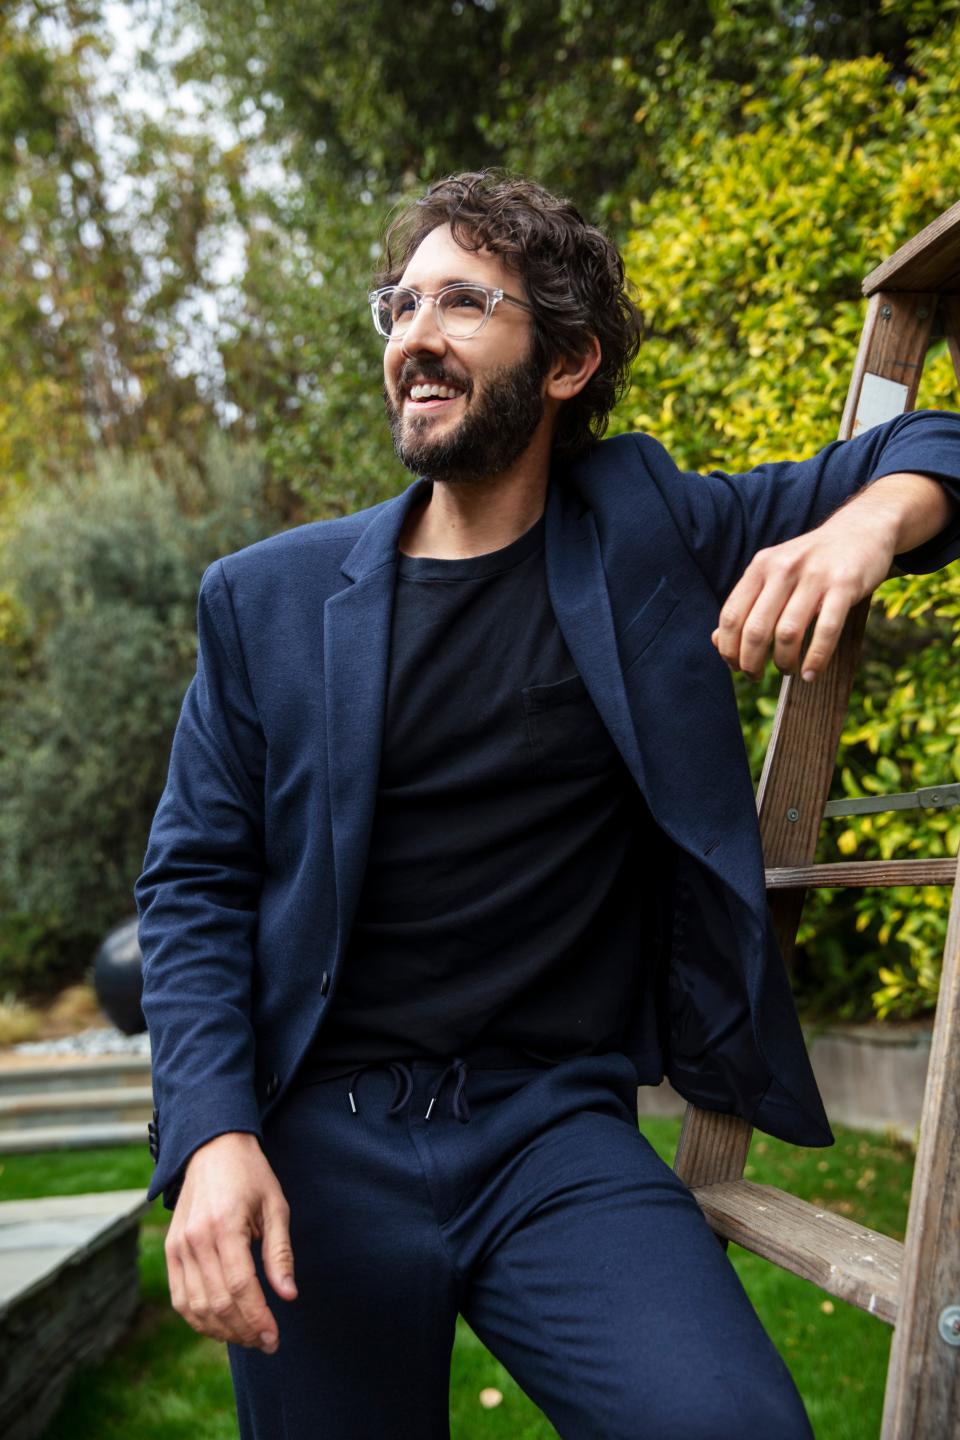 Josh Groban is traveling the country on his Harmony Tour.